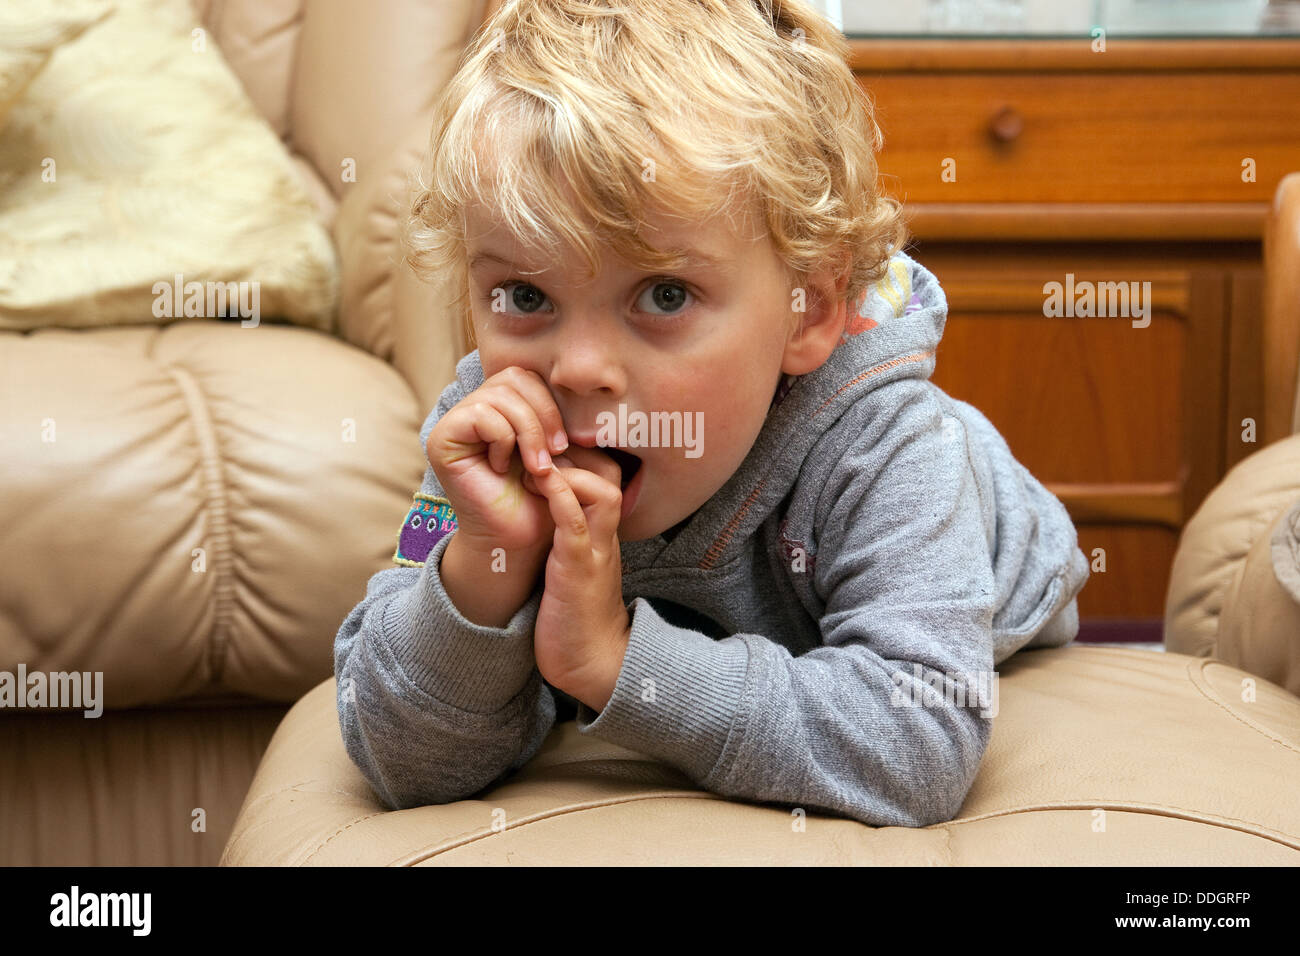 Family photos toddler boy golden hair looking thumbs in mouth Stock Photo